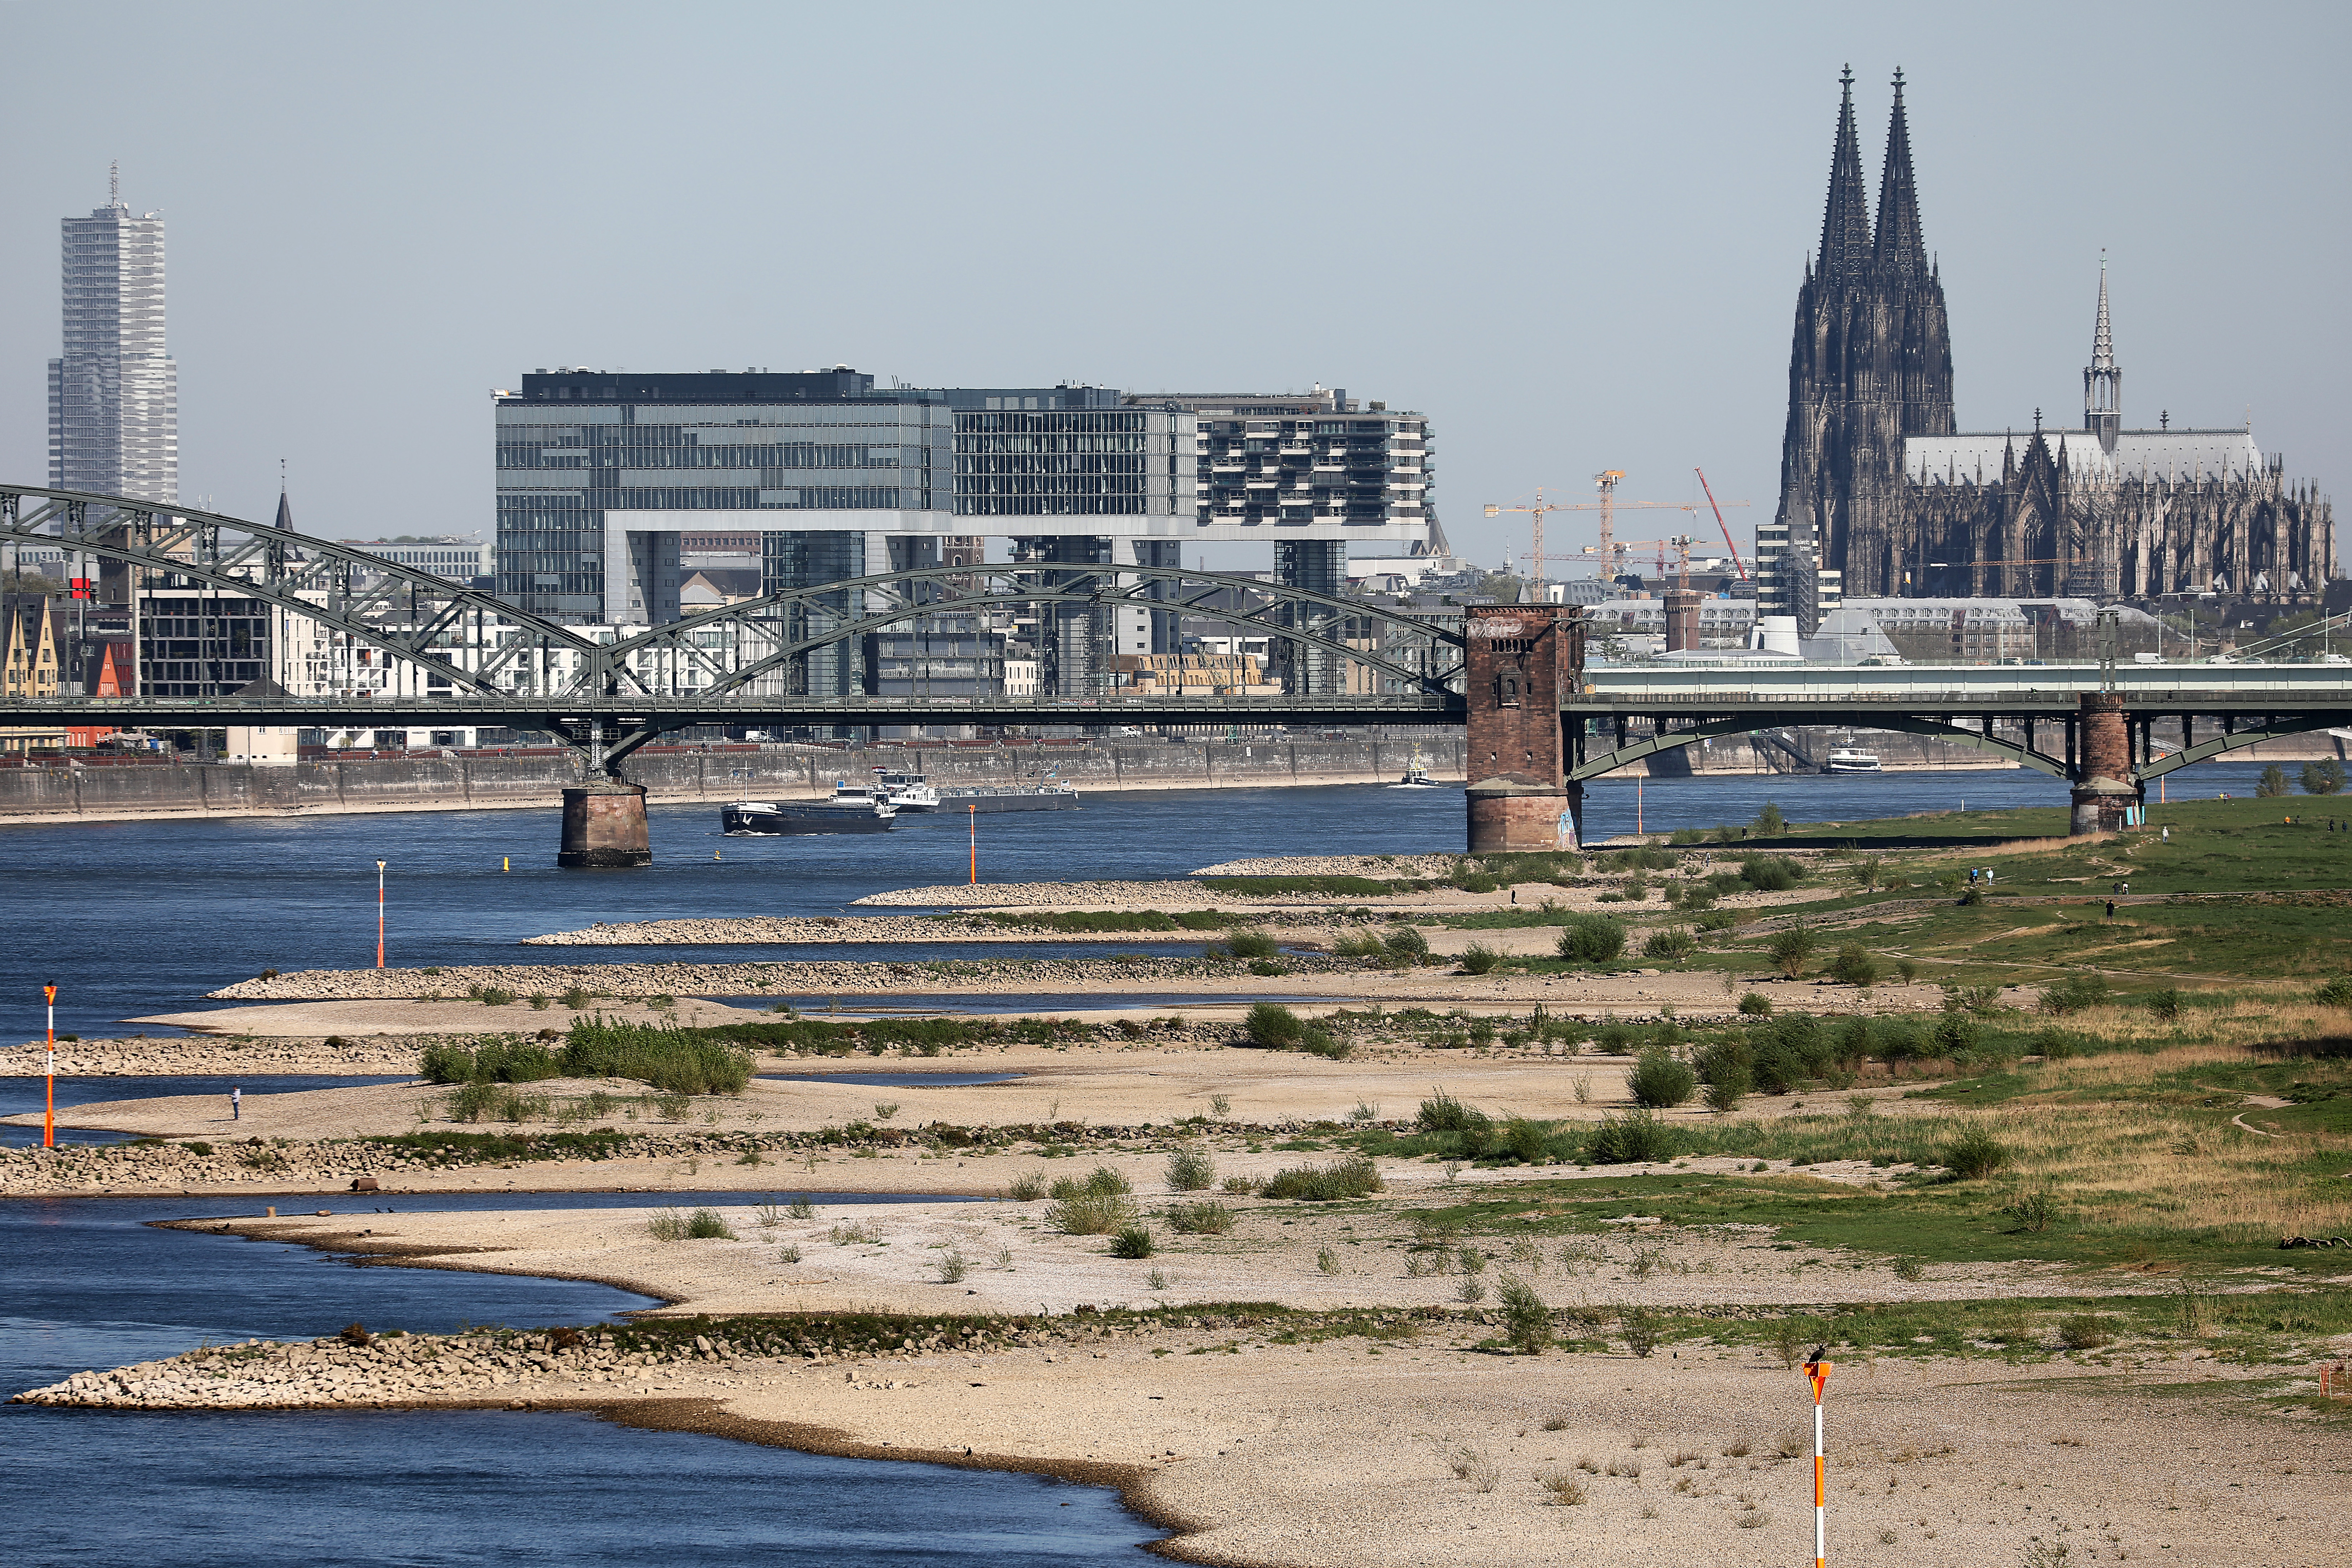 Trains to compensate for Rhine drought